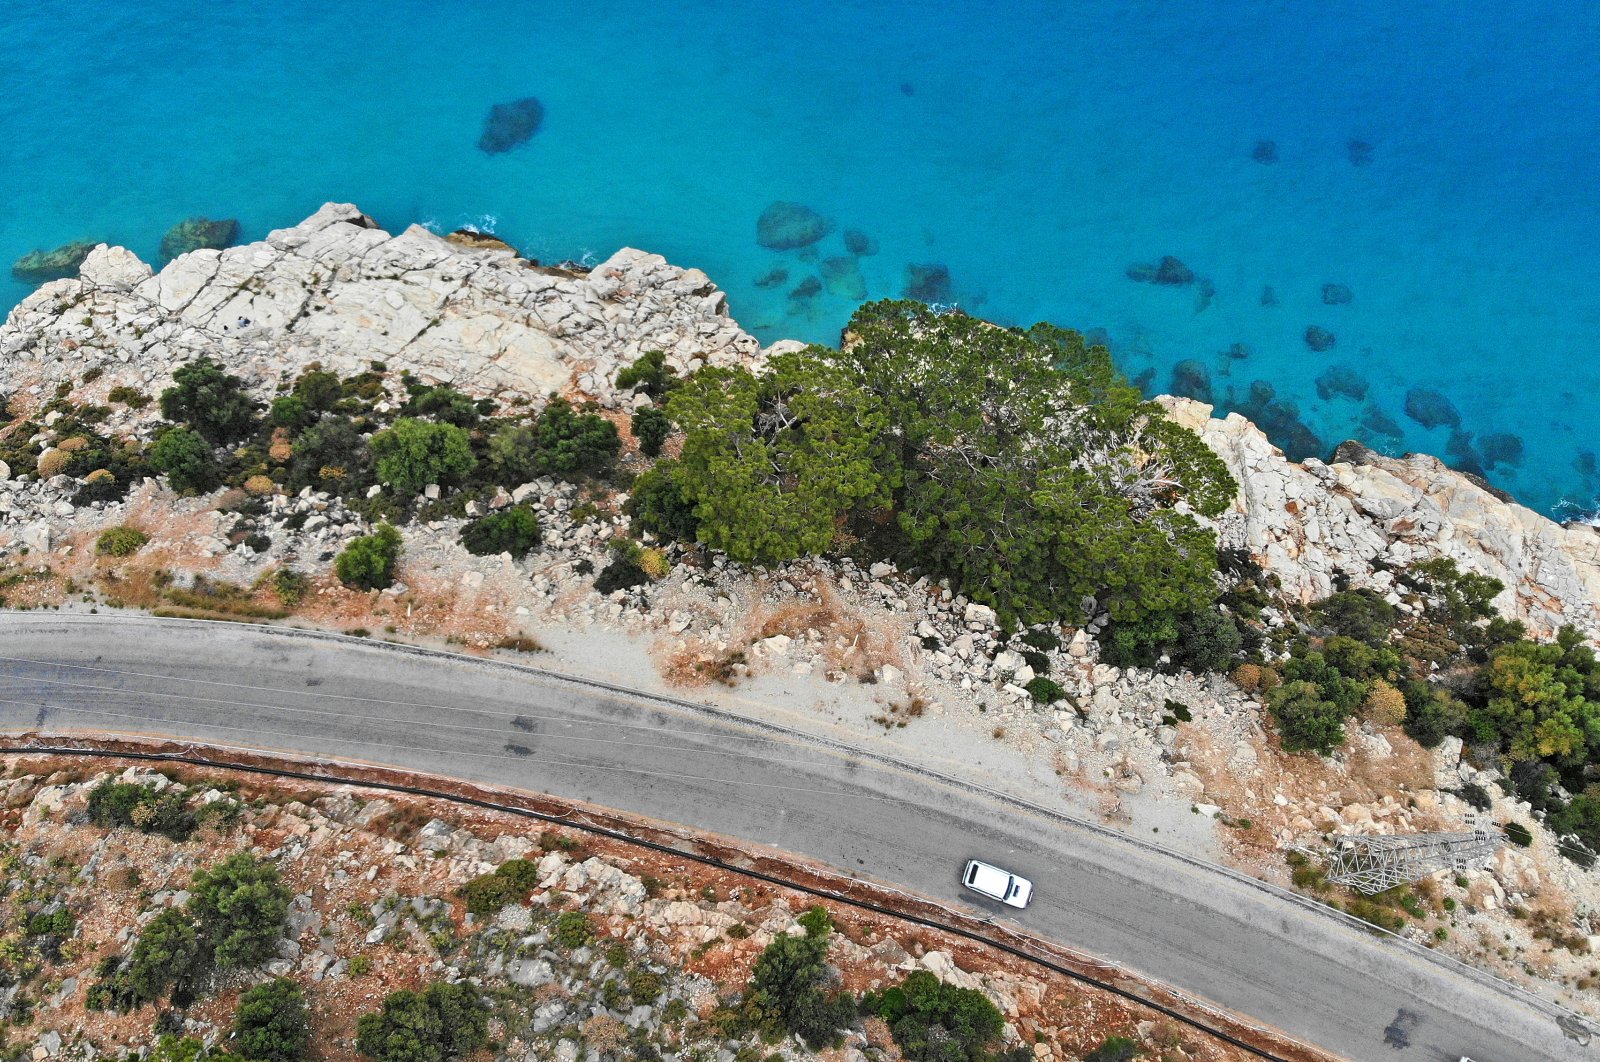 If you are planning to spend your bayram holiday in the Mediterranean or Aegean, try to take the roads less traveled to avoid crowds. (iStock Photo)